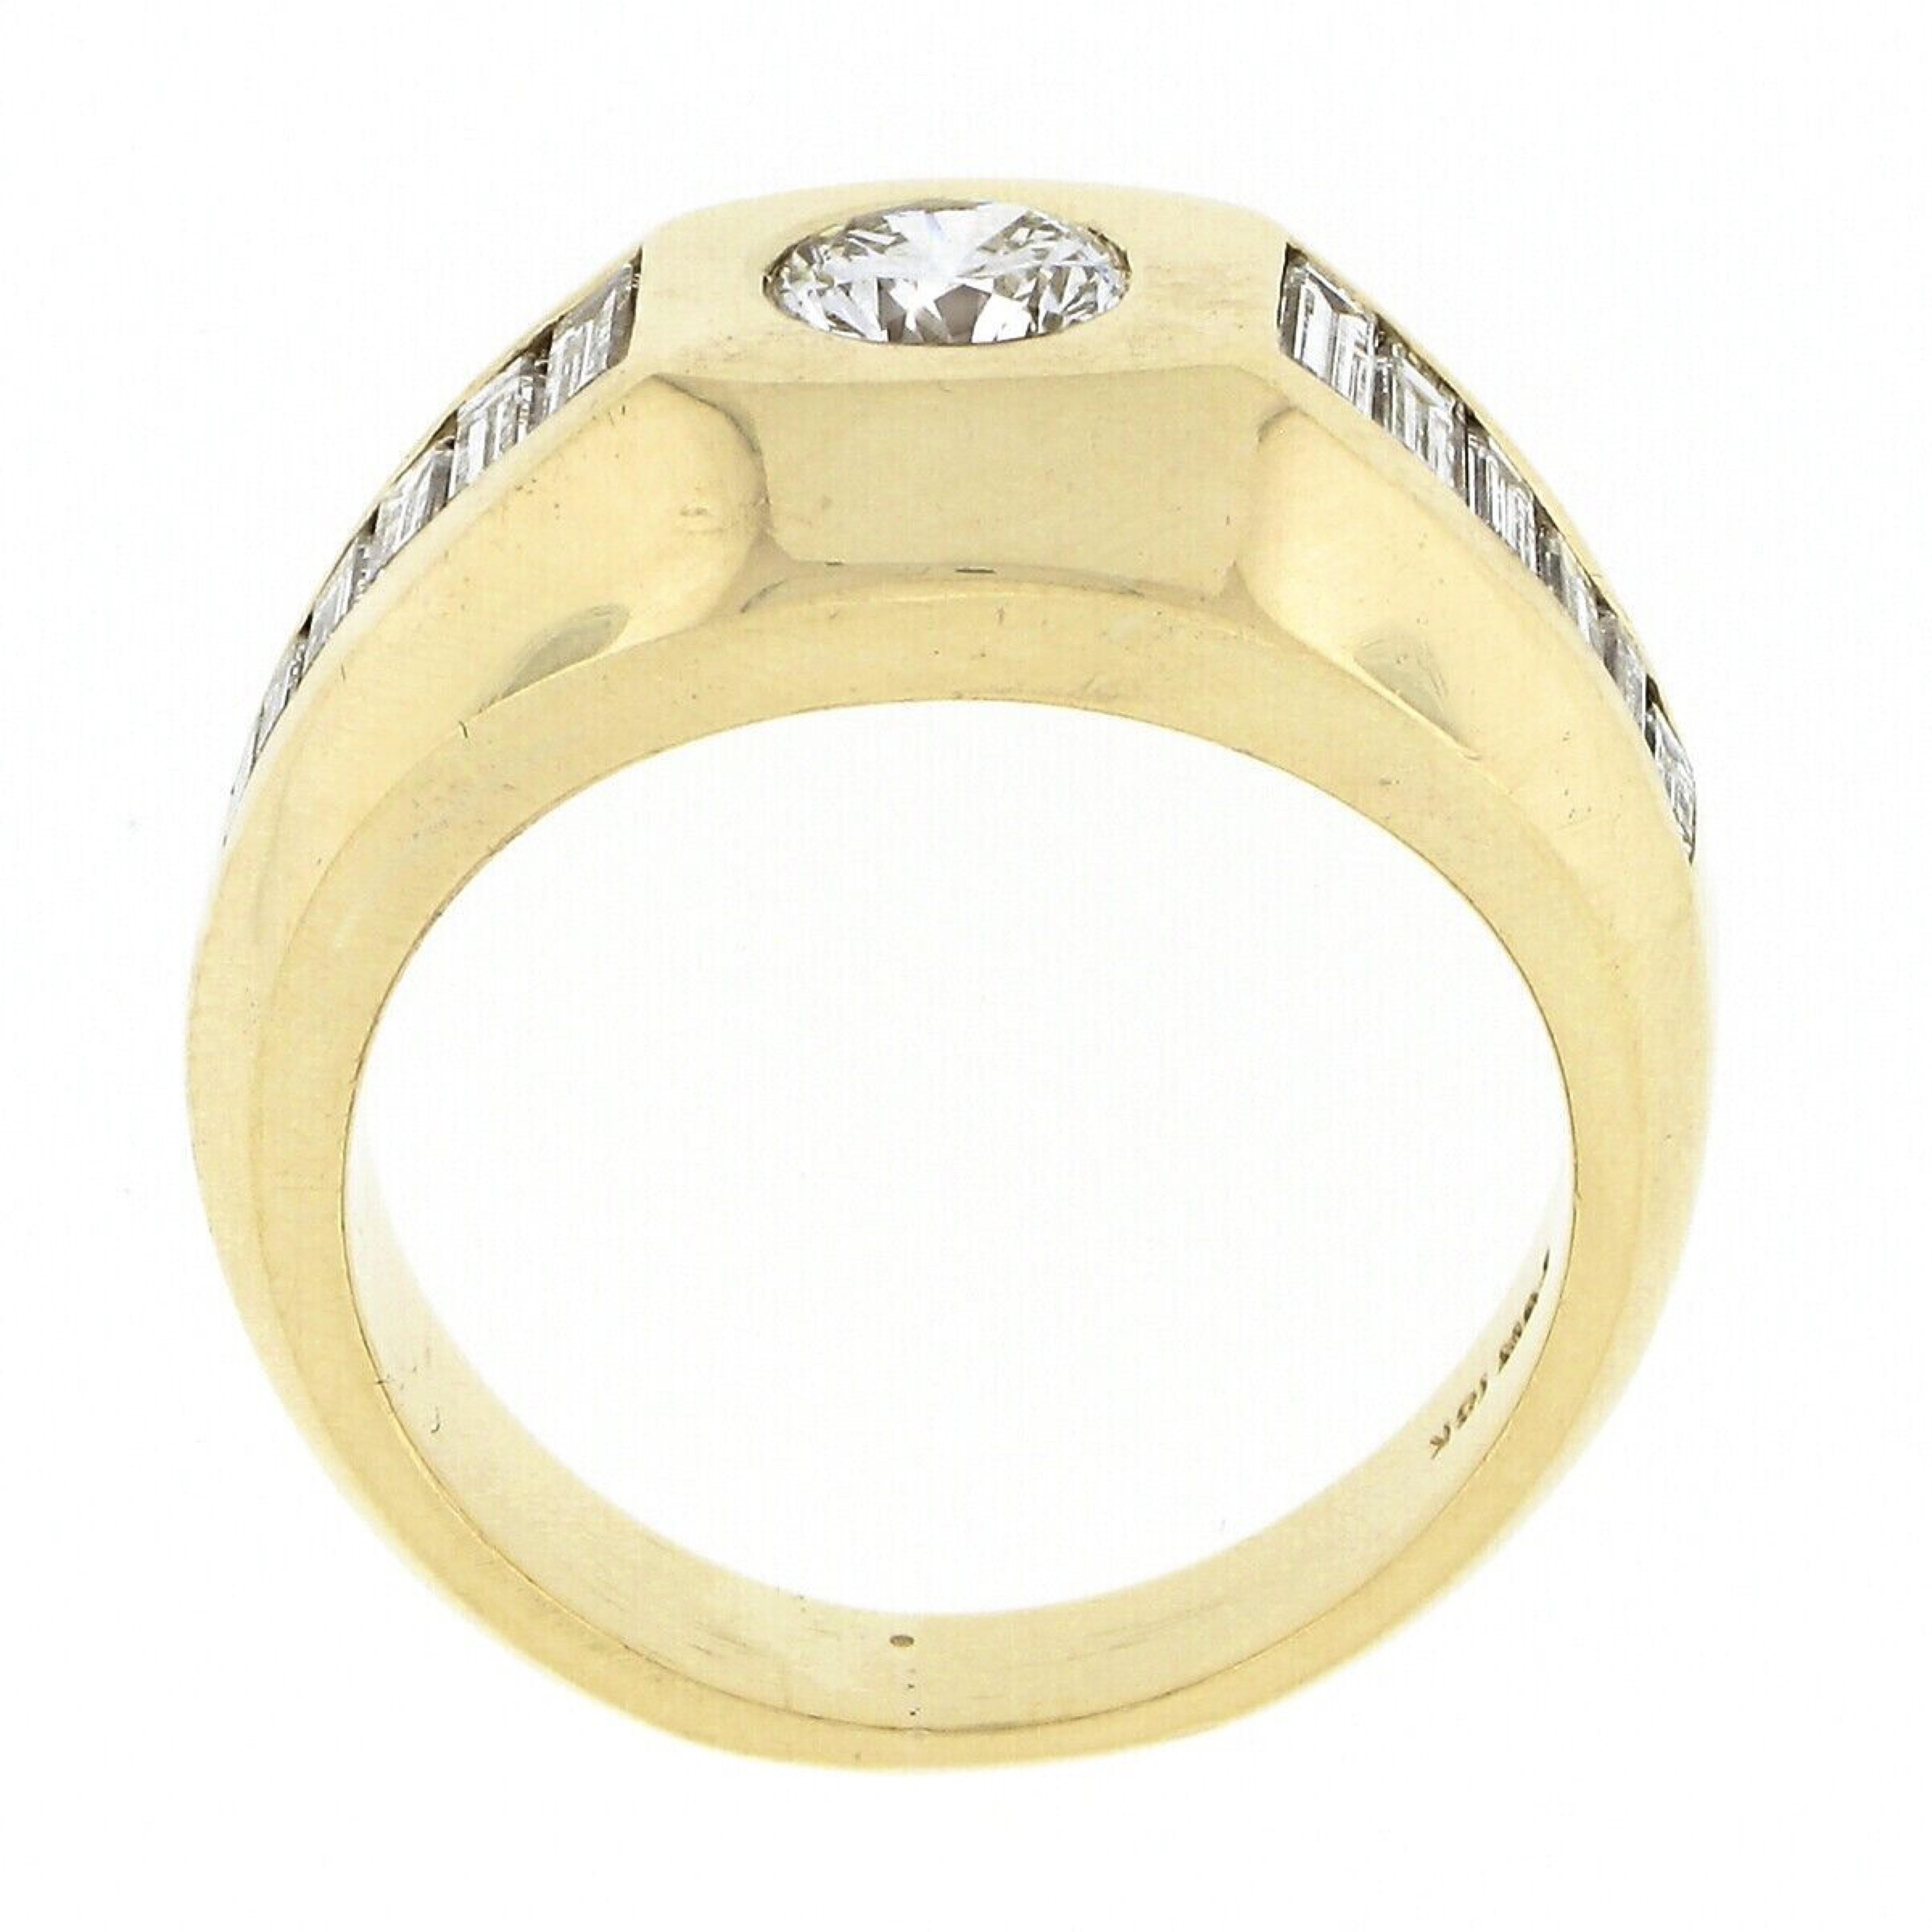 Women's or Men's Mens Vintage 18k Gold 1.83ct Round Diamond Solitaire w/ Baguette Sides Band Ring